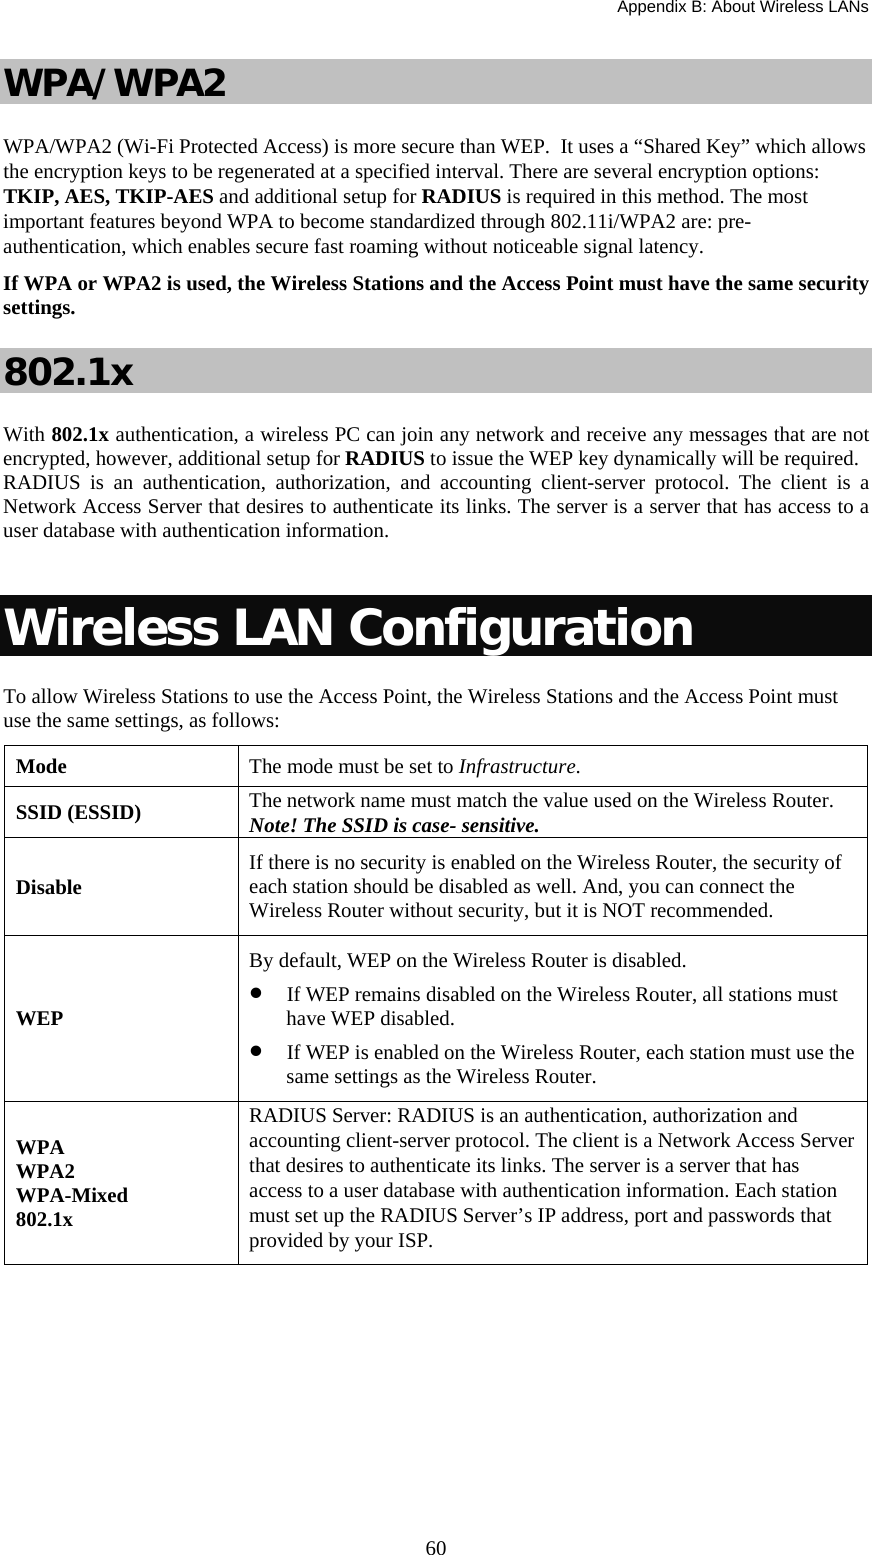 Appendix B: About Wireless LANs  60WPA/WPA2 WPA/WPA2 (Wi-Fi Protected Access) is more secure than WEP.  It uses a “Shared Key” which allows the encryption keys to be regenerated at a specified interval. There are several encryption options: TKIP, AES, TKIP-AES and additional setup for RADIUS is required in this method. The most important features beyond WPA to become standardized through 802.11i/WPA2 are: pre-authentication, which enables secure fast roaming without noticeable signal latency.  If WPA or WPA2 is used, the Wireless Stations and the Access Point must have the same security settings. 802.1x With 802.1x authentication, a wireless PC can join any network and receive any messages that are not encrypted, however, additional setup for RADIUS to issue the WEP key dynamically will be required. RADIUS is an authentication, authorization, and accounting client-server protocol. The client is a Network Access Server that desires to authenticate its links. The server is a server that has access to a user database with authentication information.  Wireless LAN Configuration To allow Wireless Stations to use the Access Point, the Wireless Stations and the Access Point must use the same settings, as follows: Mode  The mode must be set to Infrastructure. SSID (ESSID)  The network name must match the value used on the Wireless Router. Note! The SSID is case- sensitive. Disable  If there is no security is enabled on the Wireless Router, the security of each station should be disabled as well. And, you can connect the Wireless Router without security, but it is NOT recommended. WEP  By default, WEP on the Wireless Router is disabled. • If WEP remains disabled on the Wireless Router, all stations must have WEP disabled. • If WEP is enabled on the Wireless Router, each station must use the same settings as the Wireless Router. WPA WPA2 WPA-Mixed 802.1x RADIUS Server: RADIUS is an authentication, authorization and accounting client-server protocol. The client is a Network Access Server that desires to authenticate its links. The server is a server that has access to a user database with authentication information. Each station must set up the RADIUS Server’s IP address, port and passwords that provided by your ISP.    